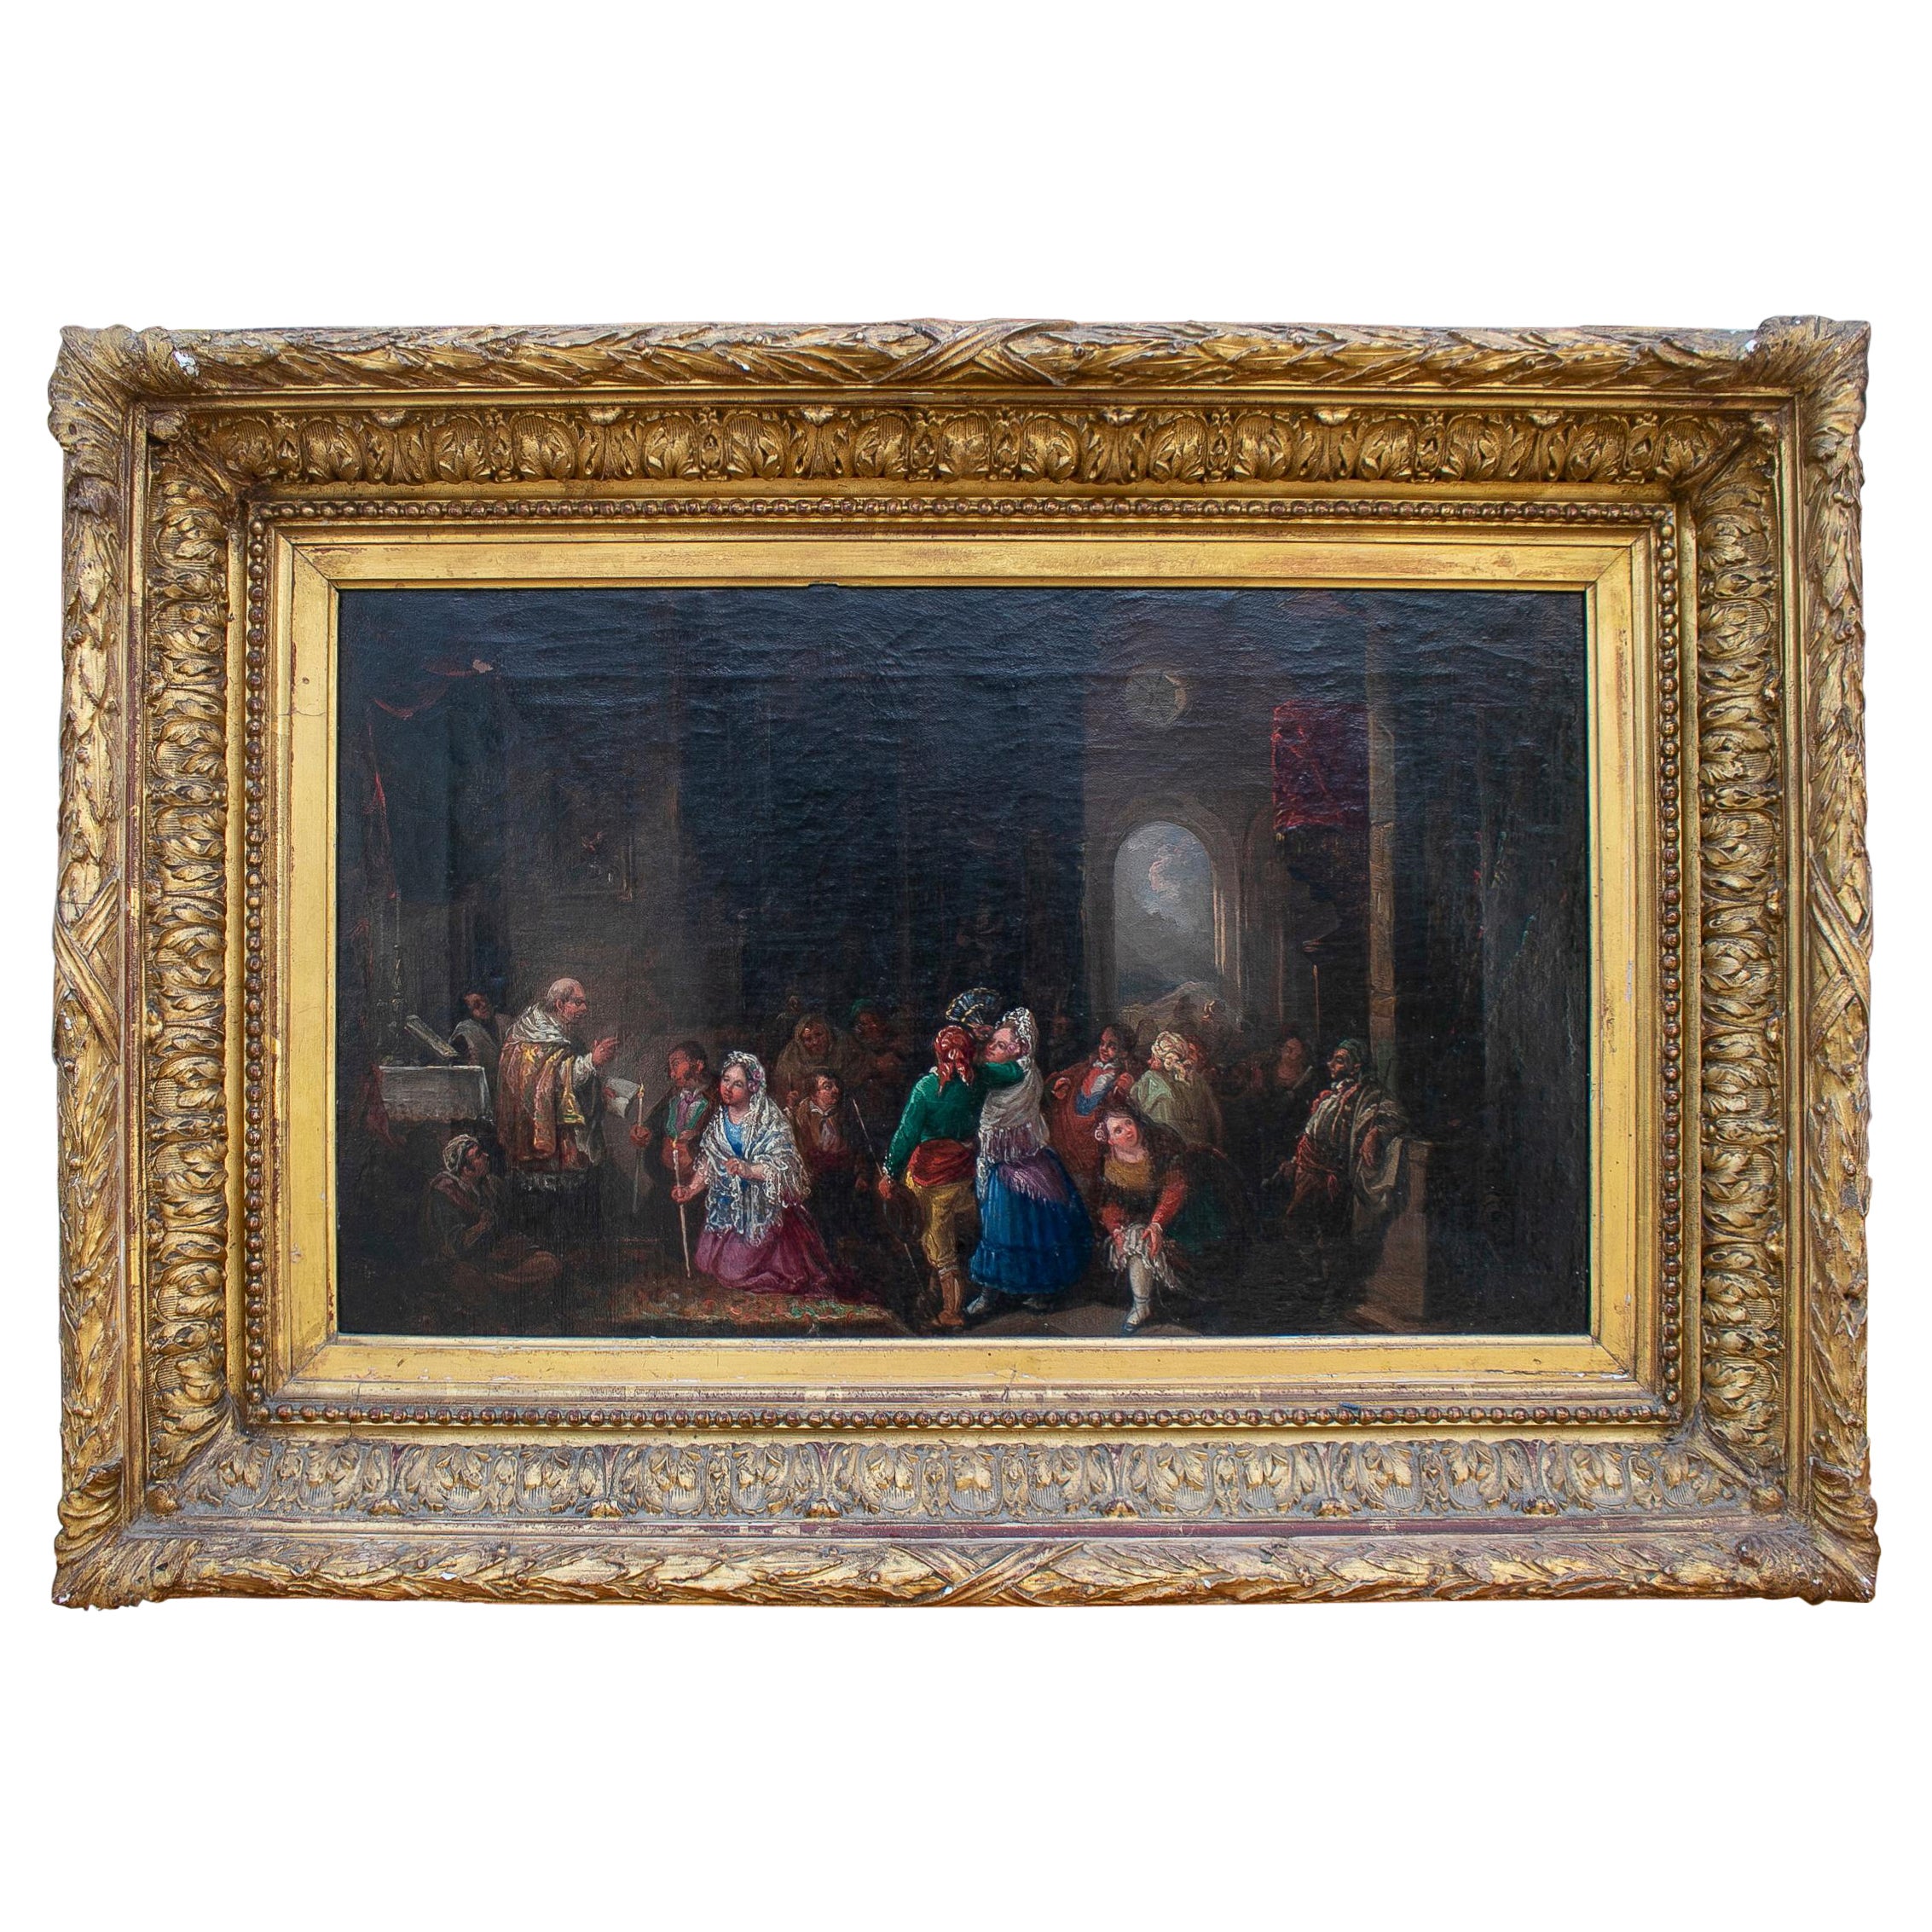 19th Century Oil on Canvas Painting Attributed to Eugenio Lucas Villamamil